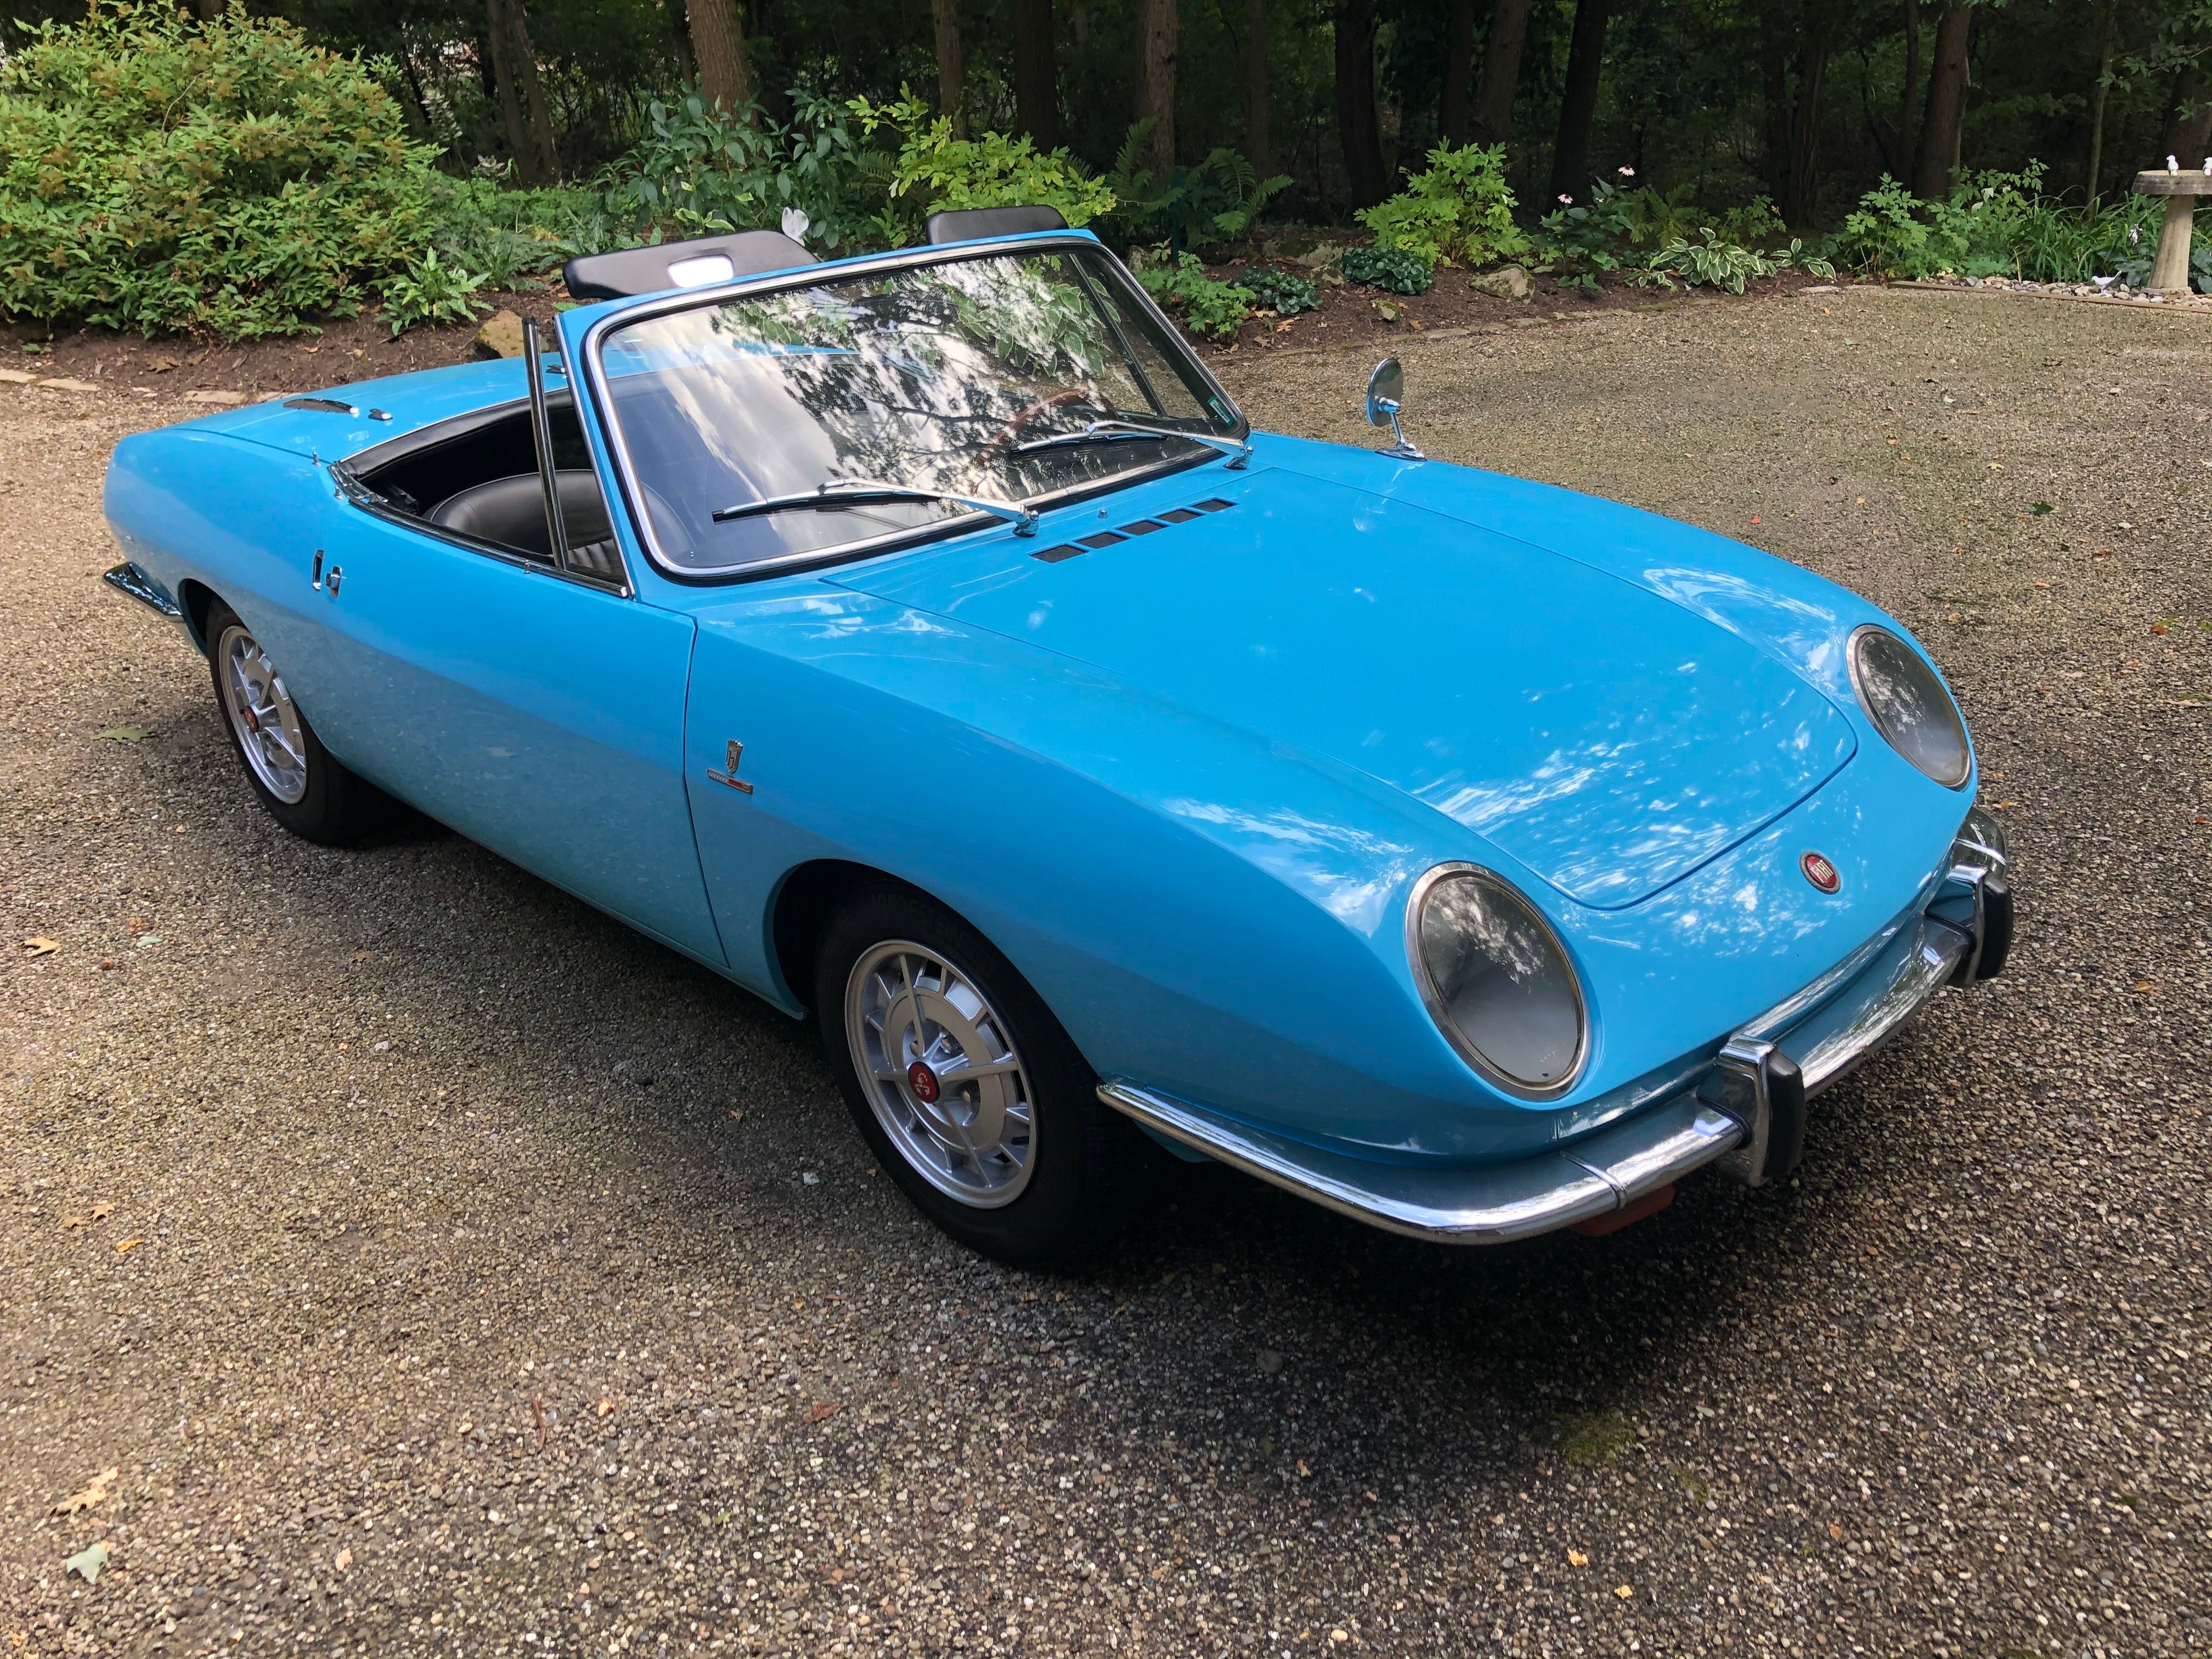 1967 Fiat 850 Spider: Affordable classic sports car.